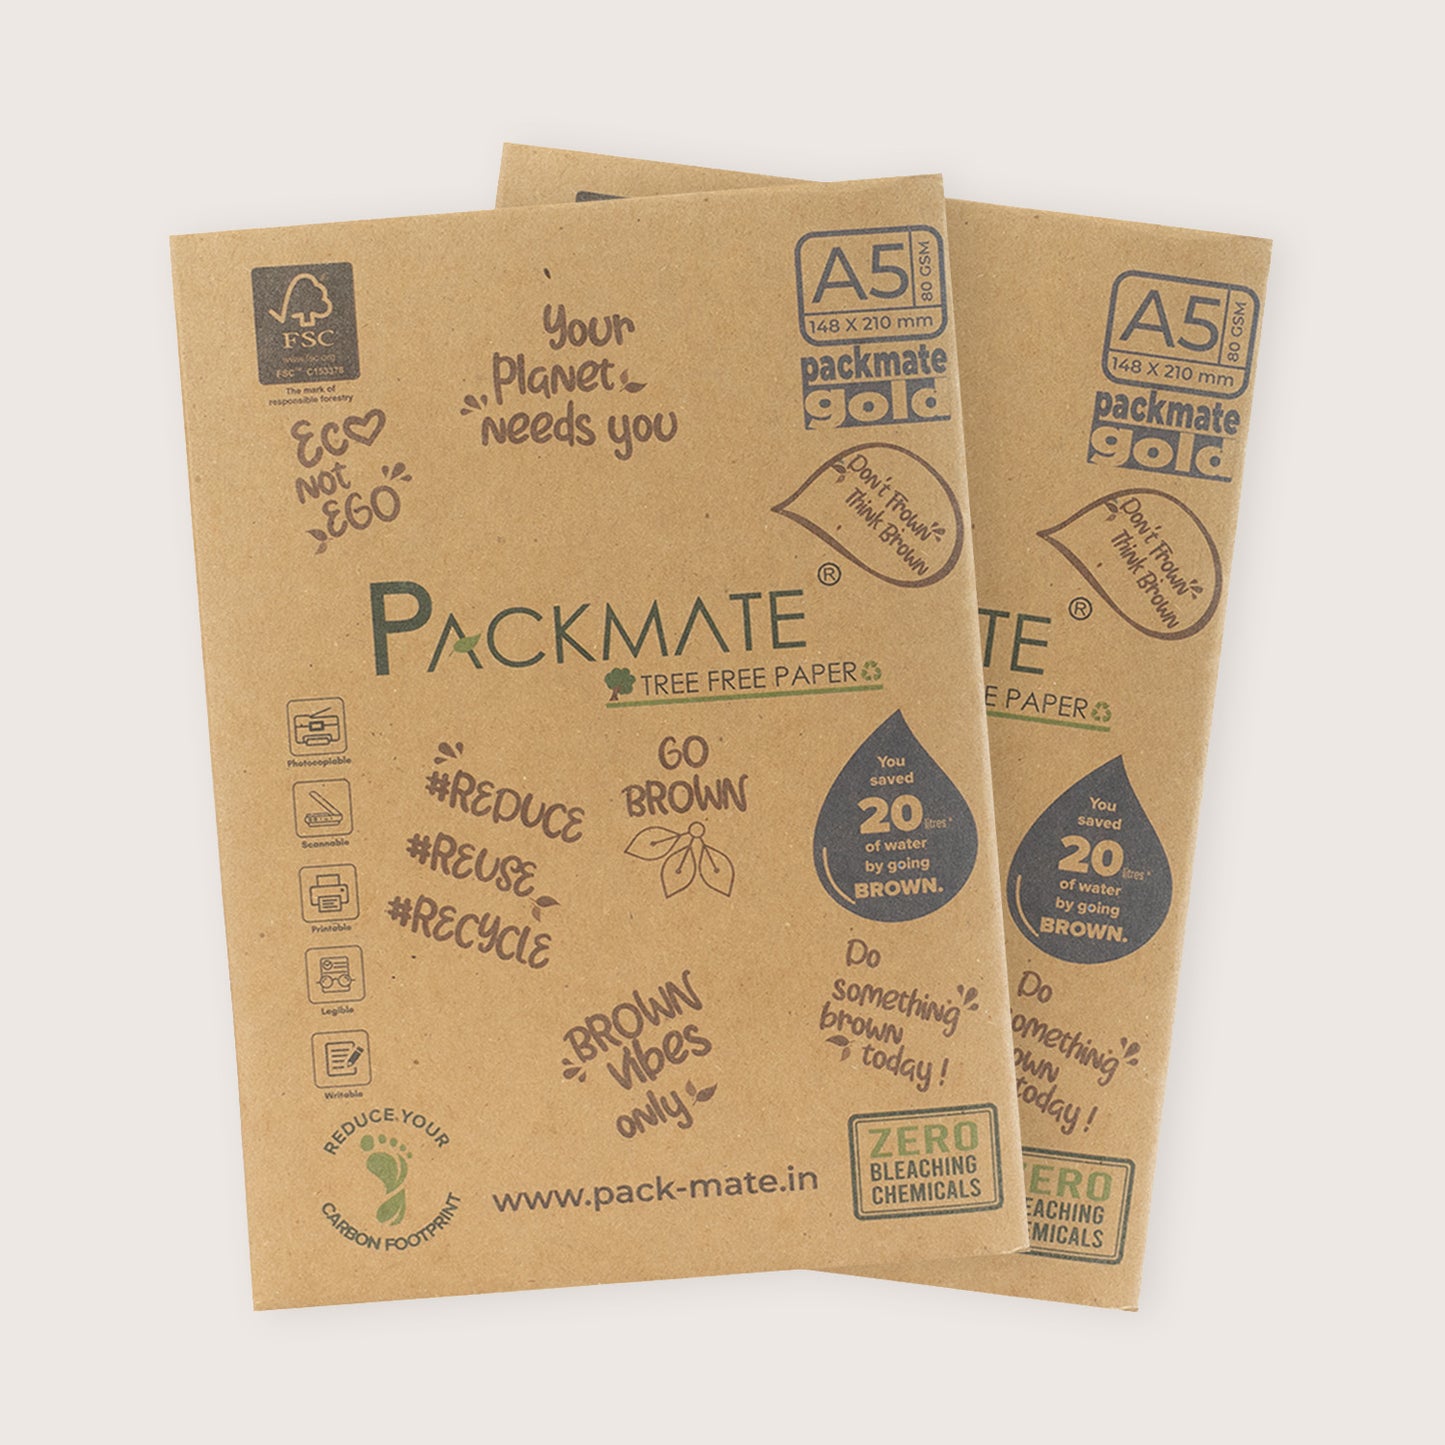 Packmate Gold Copier - A5, 1 Ream, 500 Sheet (Pack of 2)  Made From 100% Recycled Paper